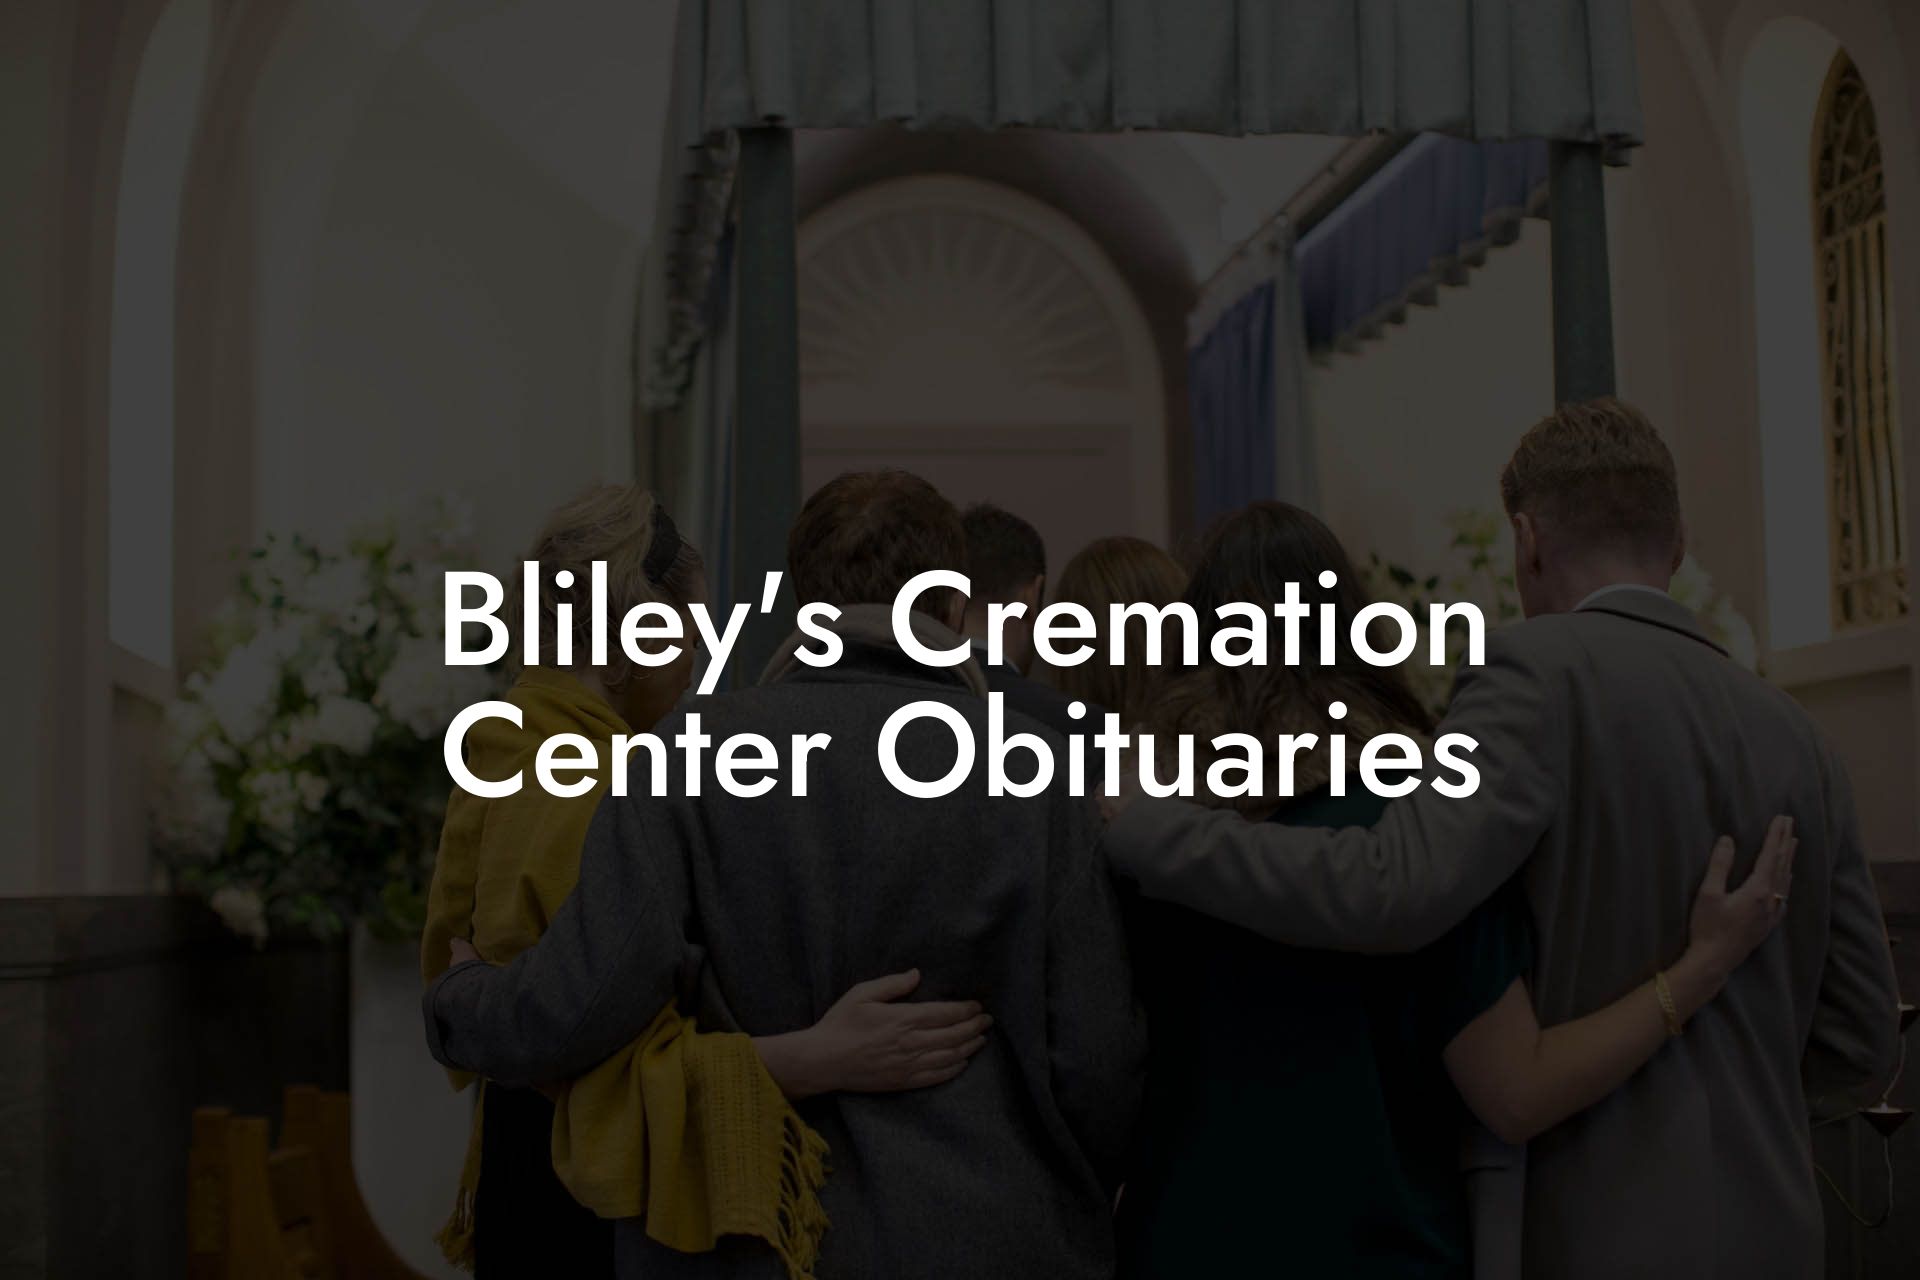 Bliley's Cremation Center Obituaries